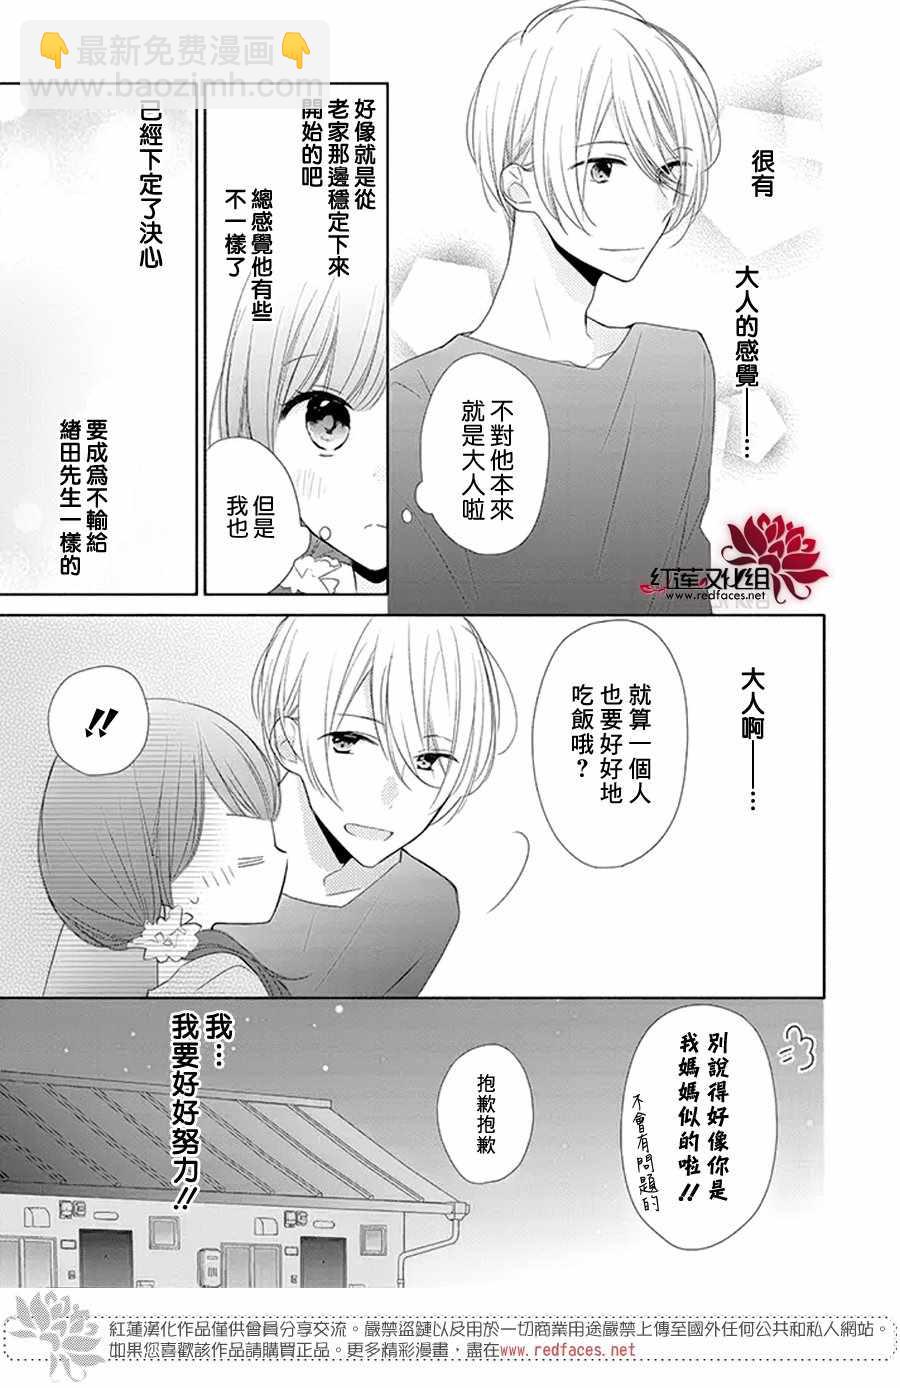 If given a second chance - 15话 - 5